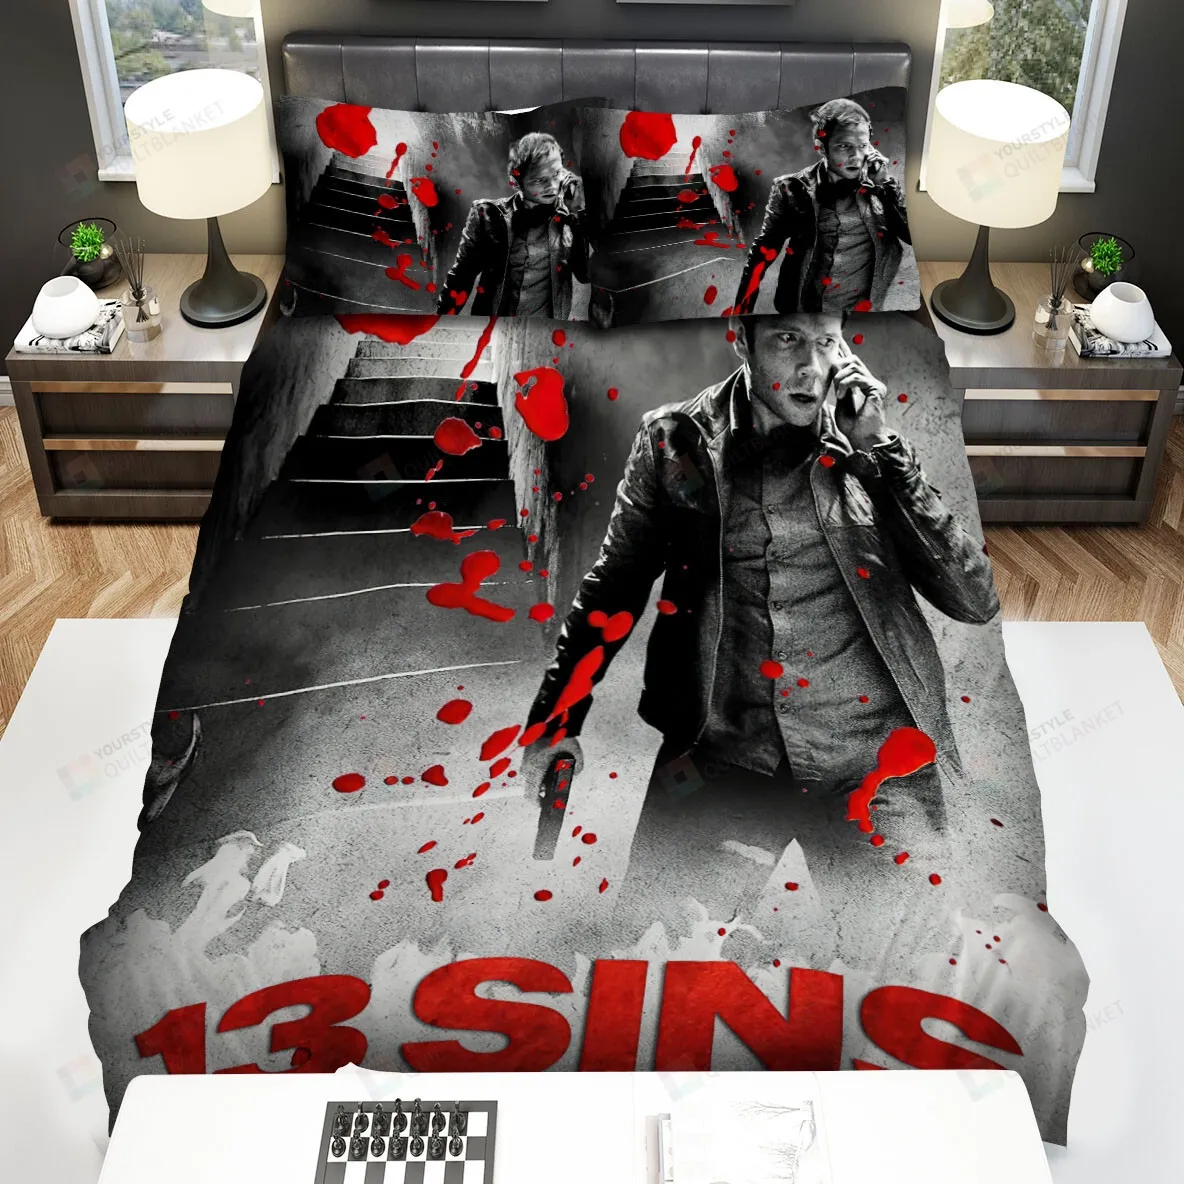 13 Sins The Men Is Hearing The Phone With Gun On The Hand Movie Poster Bed Sheets Spread Comforter Duvet Cover Bedding Sets